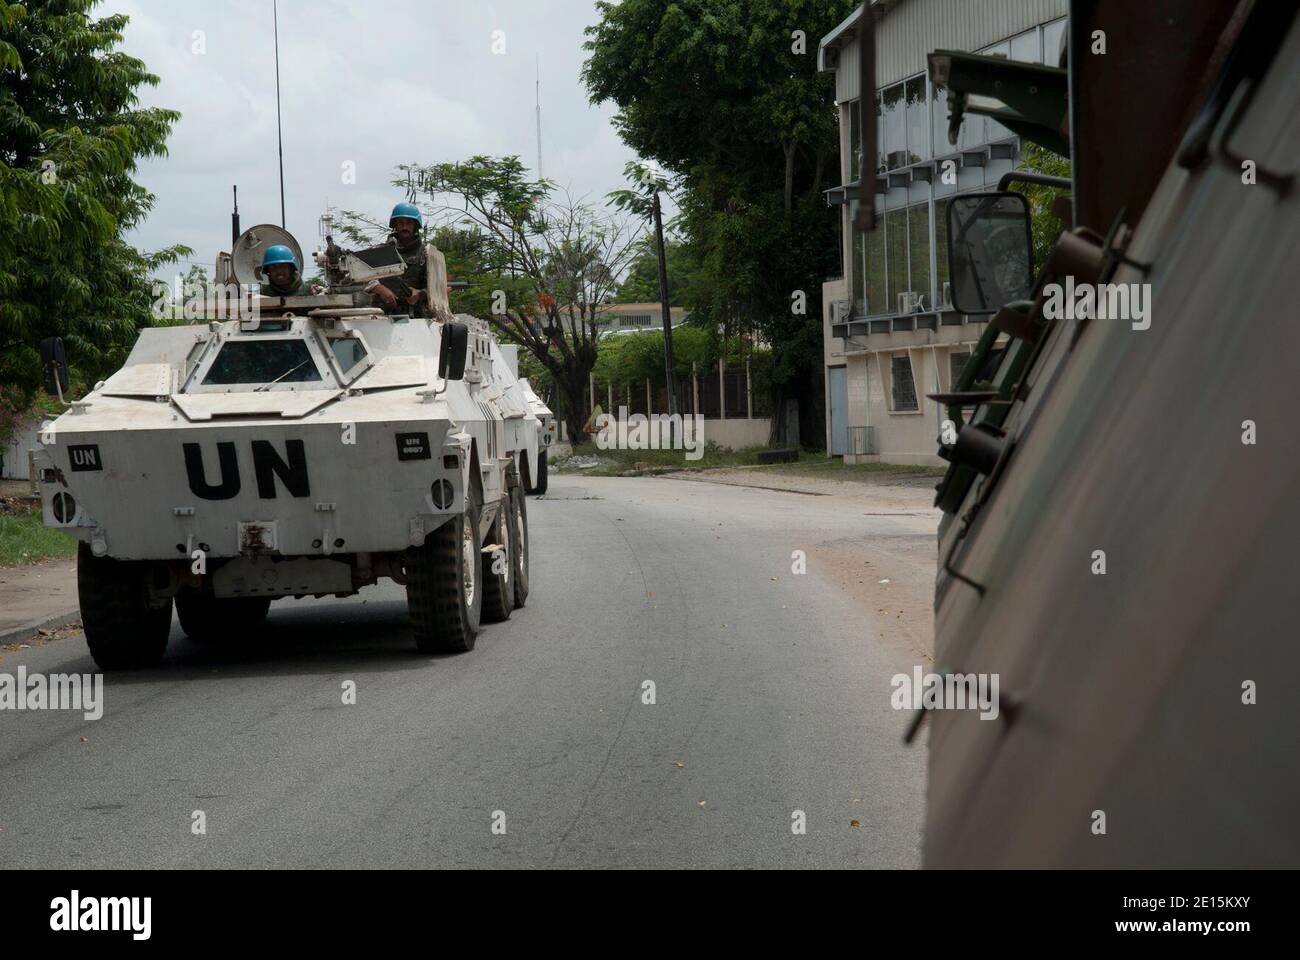 UN forces patrolling with armored vehicles in a street of Abidjan, Ivory Coast on April 2, 2011. France has also boosted its UN Licorne (Unicorn) mission in the cocoa-rich nation by 300 to around 1,400 troops, where part of their mission is to protect foreigners from attacks and looting amid rising insecurity. Photo by SCH Blanchet/ECPAD/ABACAPRESS.COM Stock Photo